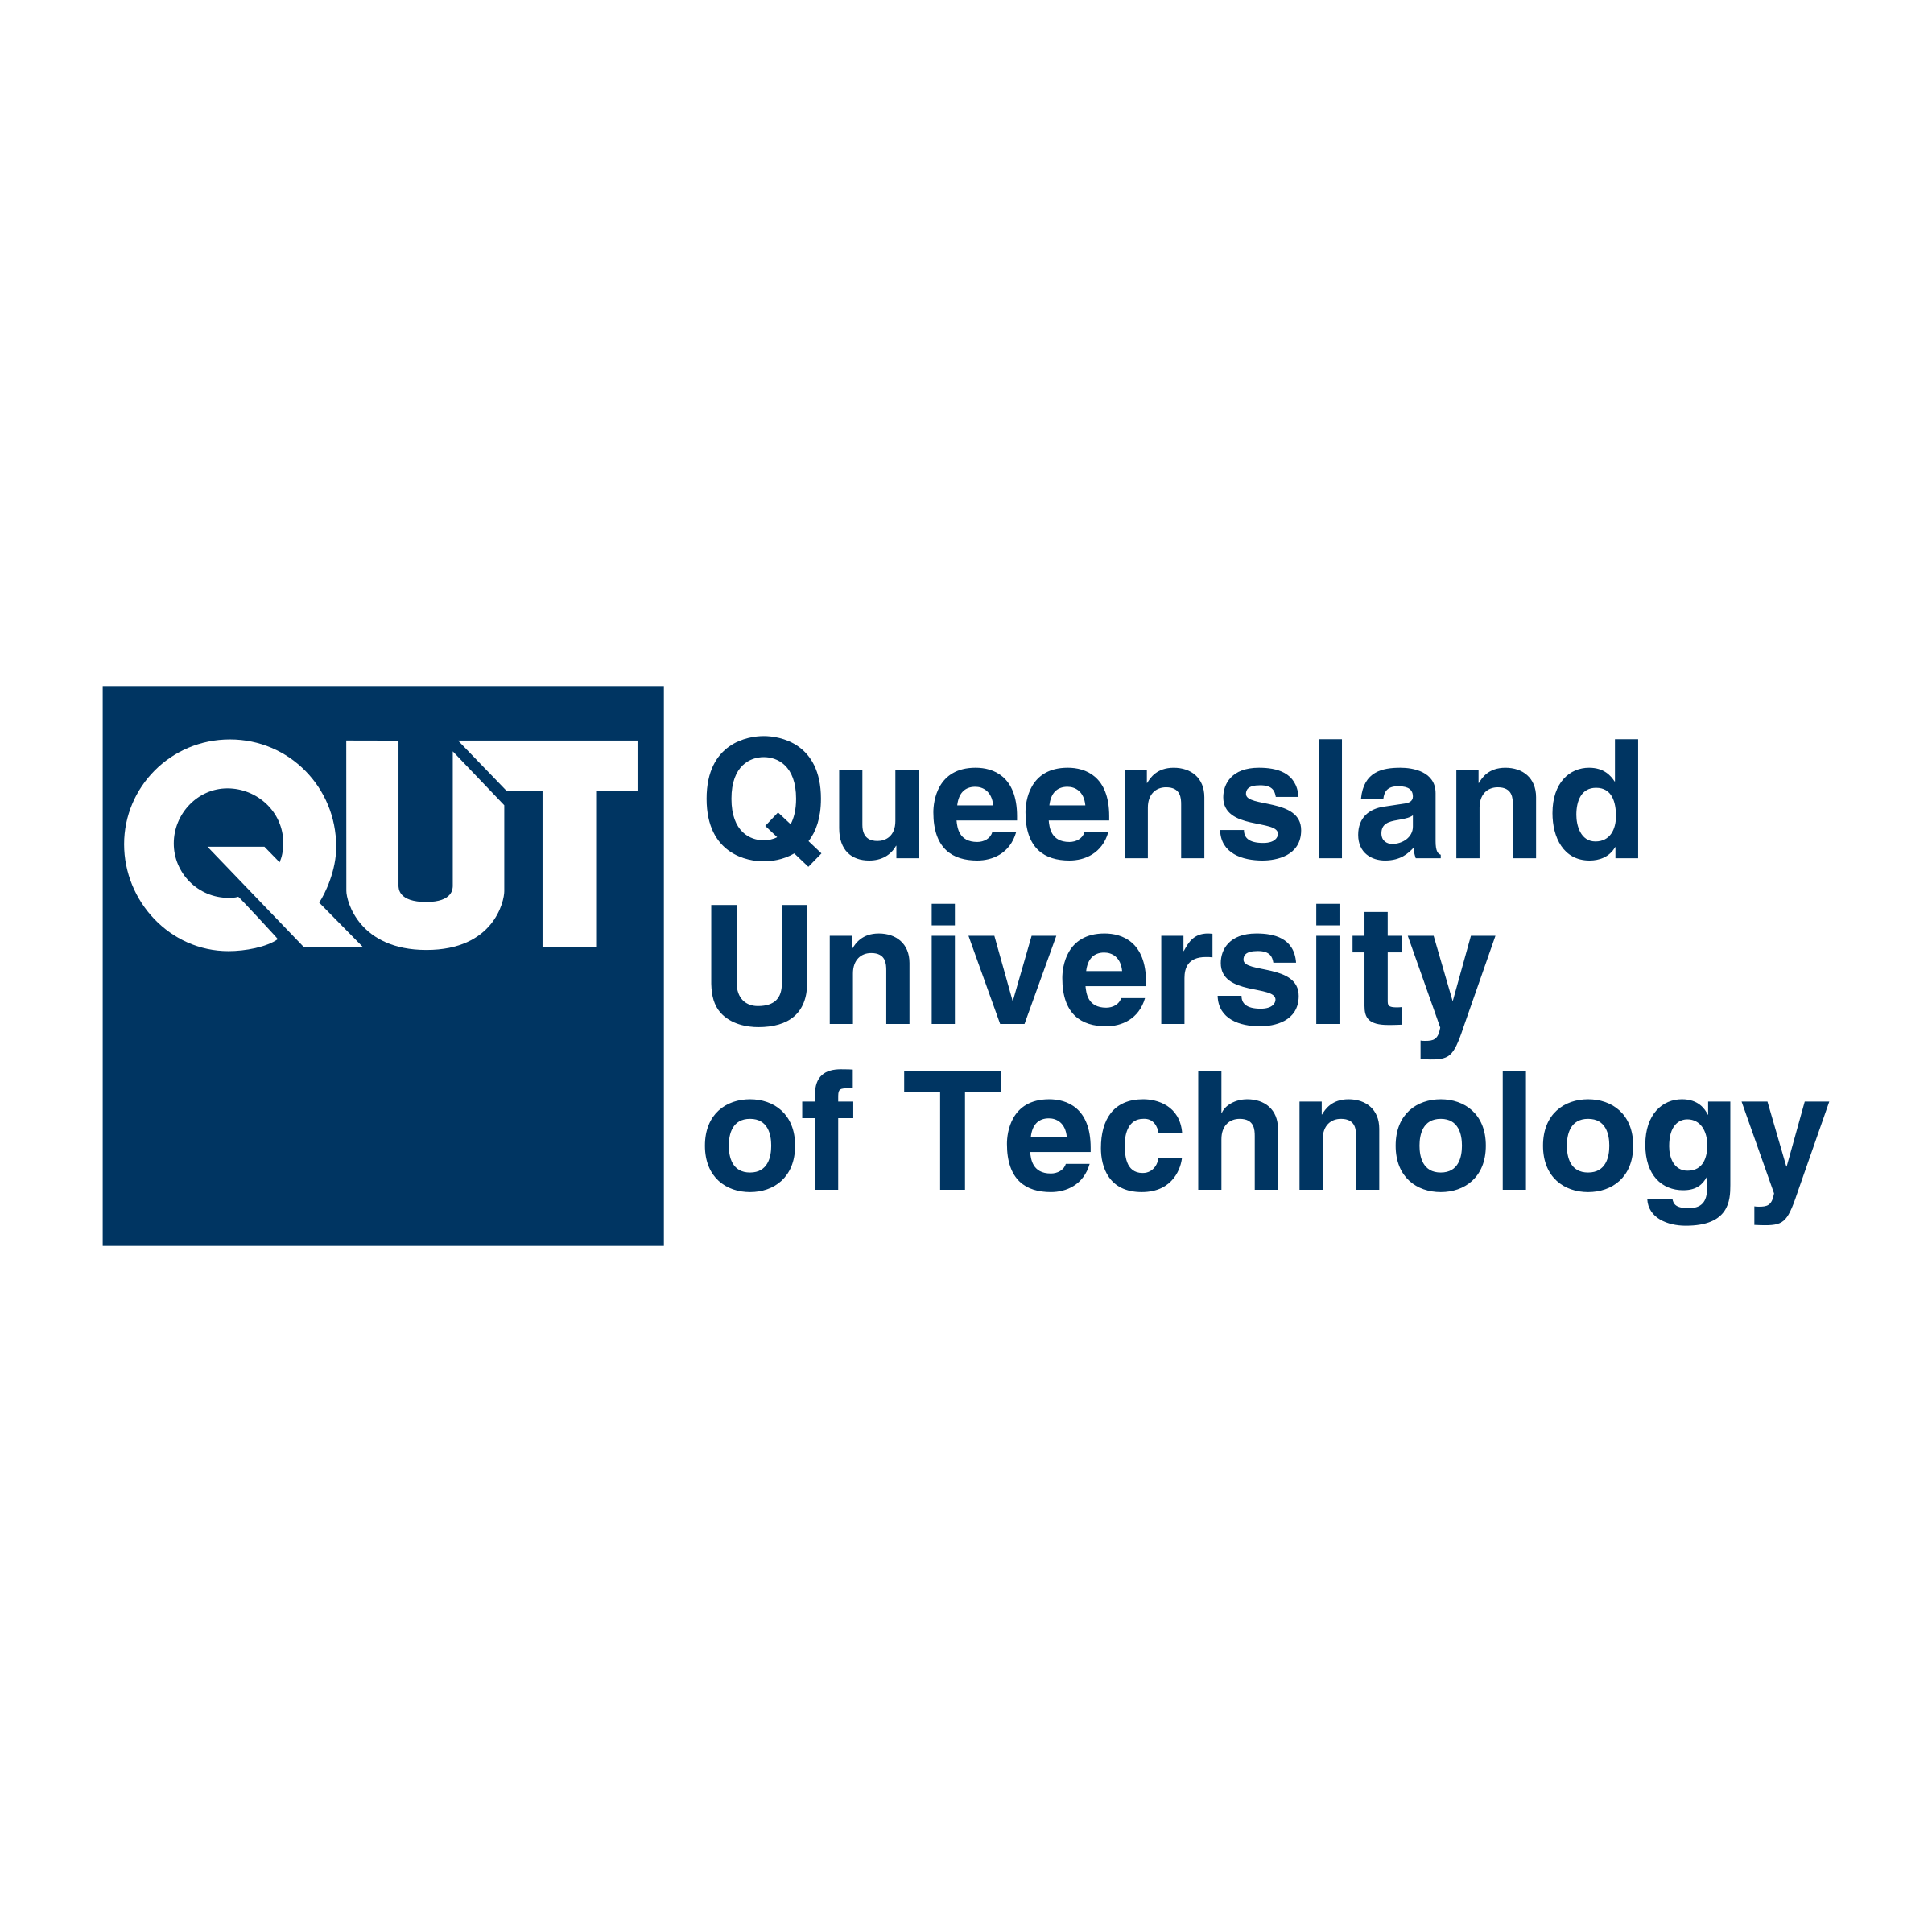 Bachelor of Design - International (Industrial Design) | Bachelor's degree | Engineering & Technology | On Campus | 4 years | Queensland University of Technology | Australia